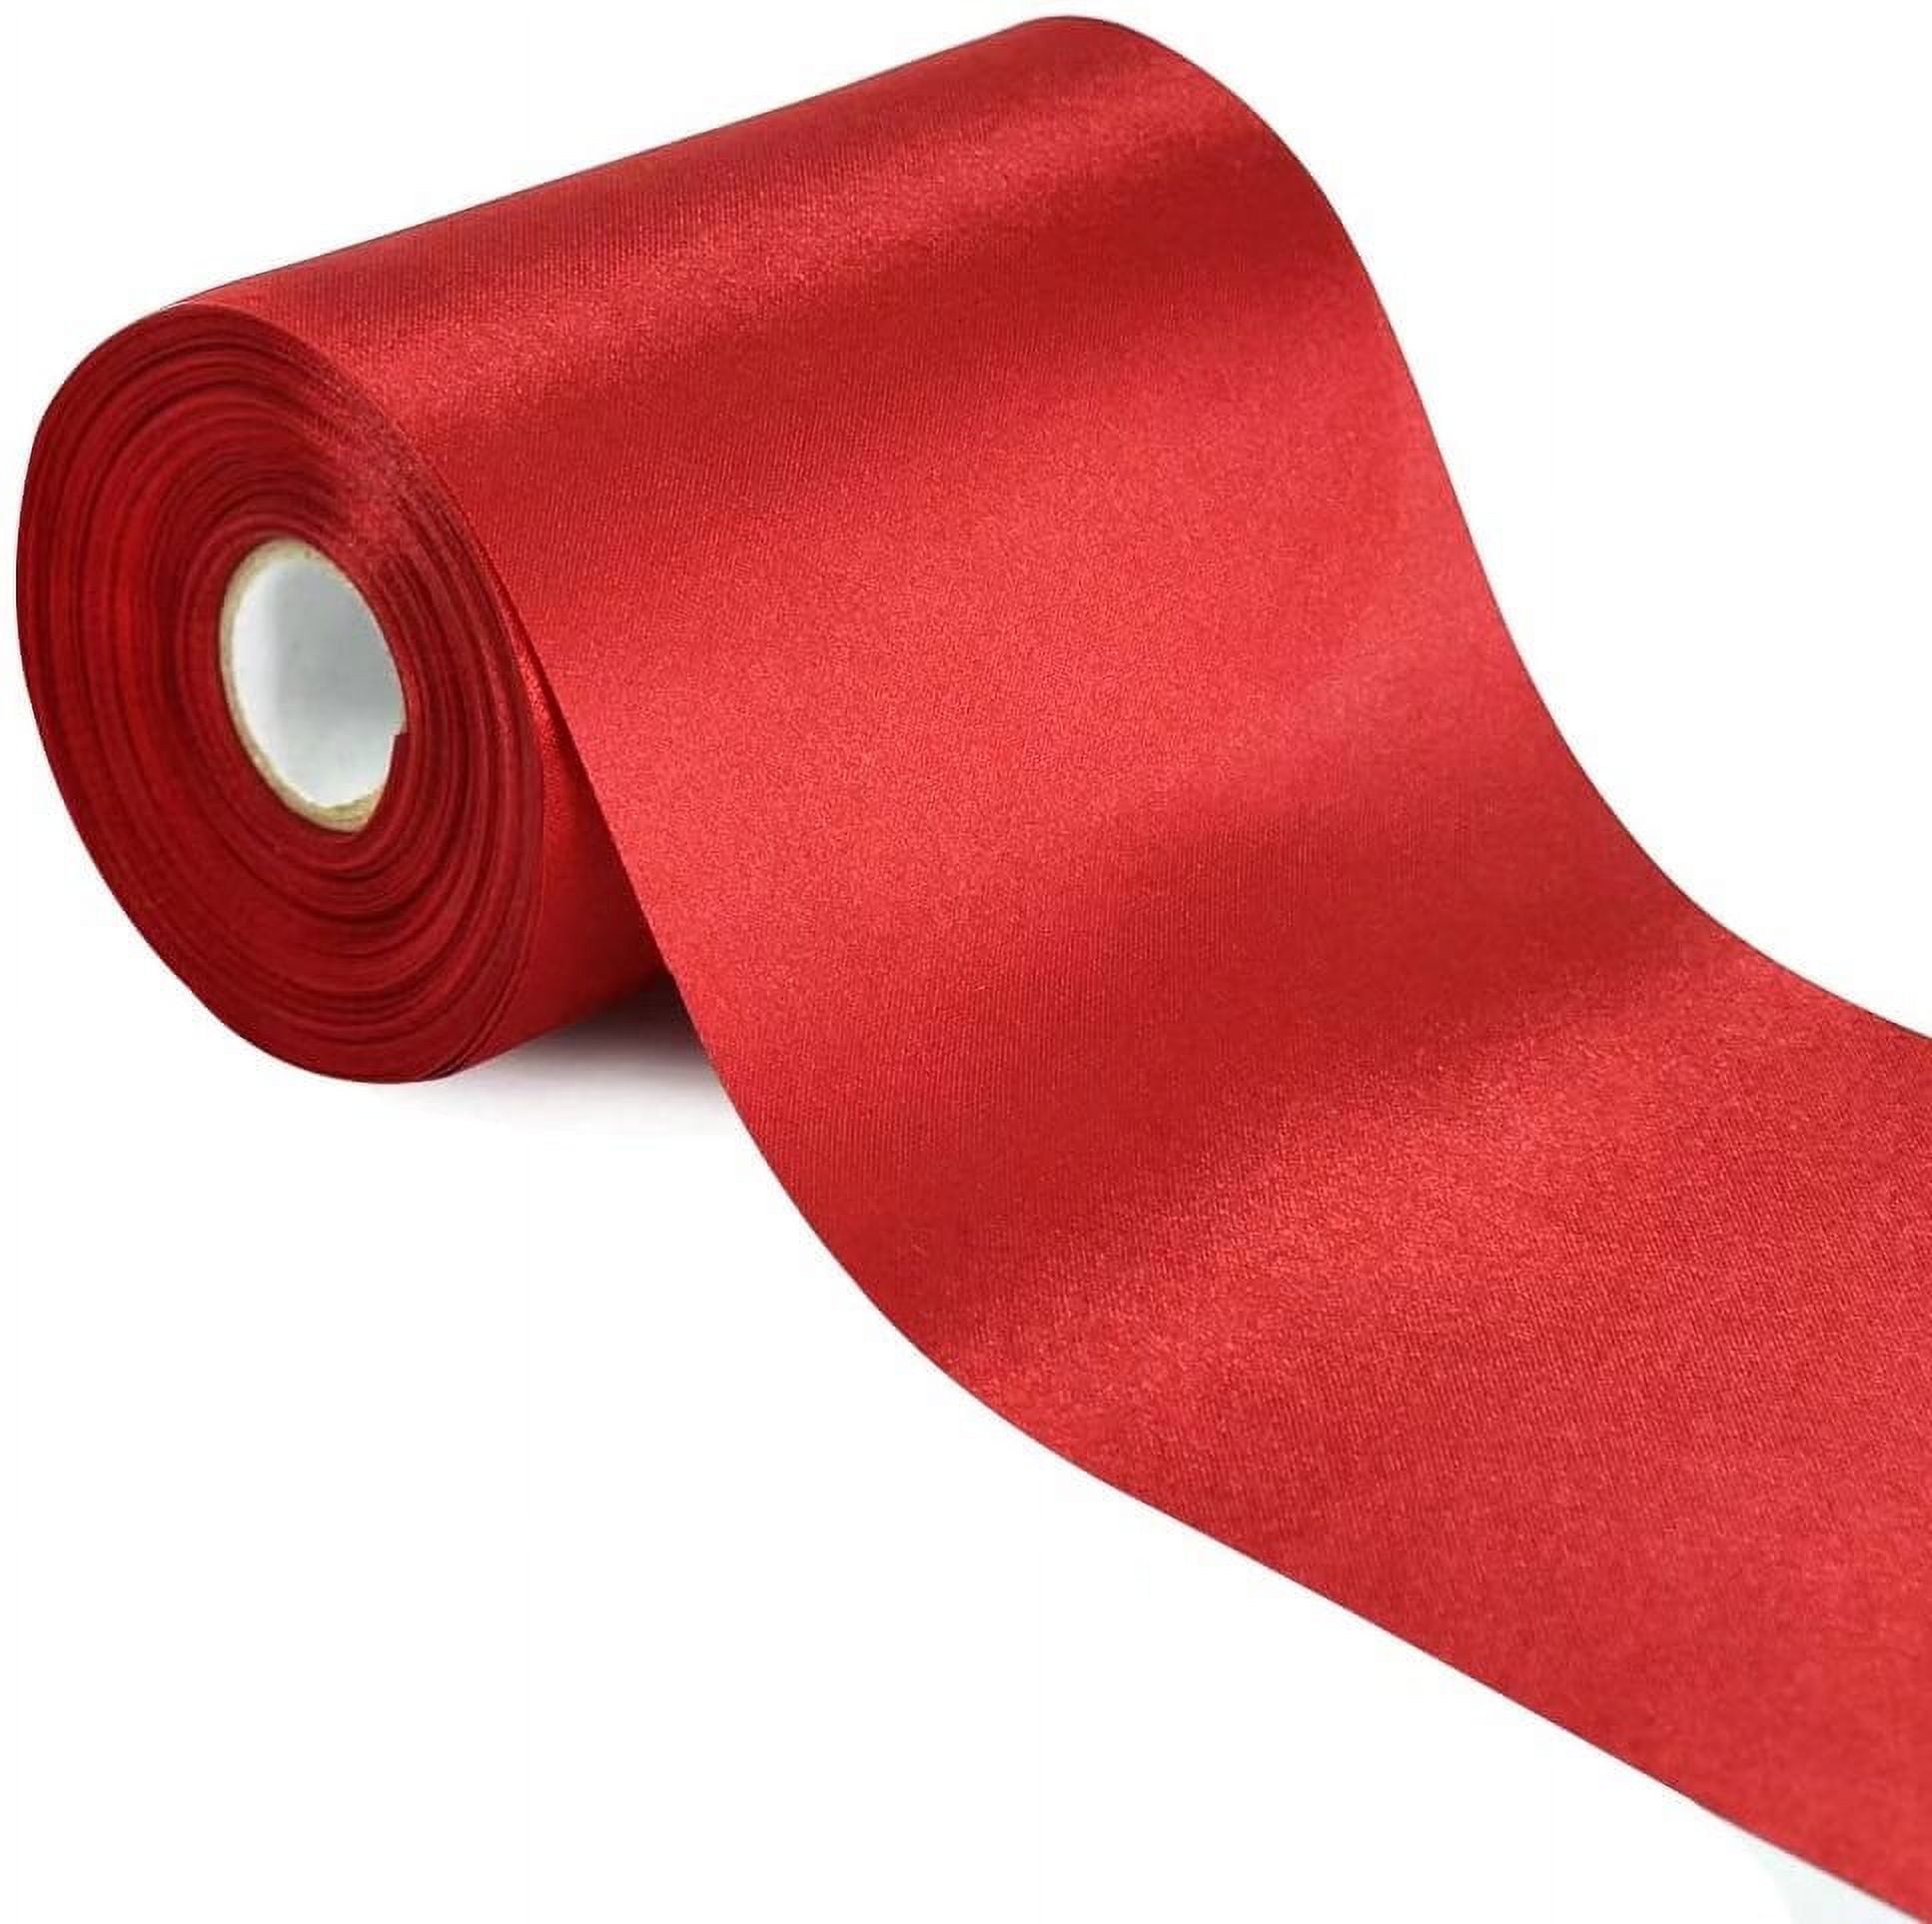 TONIFUL 1/4 Inch x 100yds Red Satin Ribbon, Thin Solid Color Satin Ribbon  for Gift Wrapping, Crafts, Hair Bows Making, Wedding Party Decoration